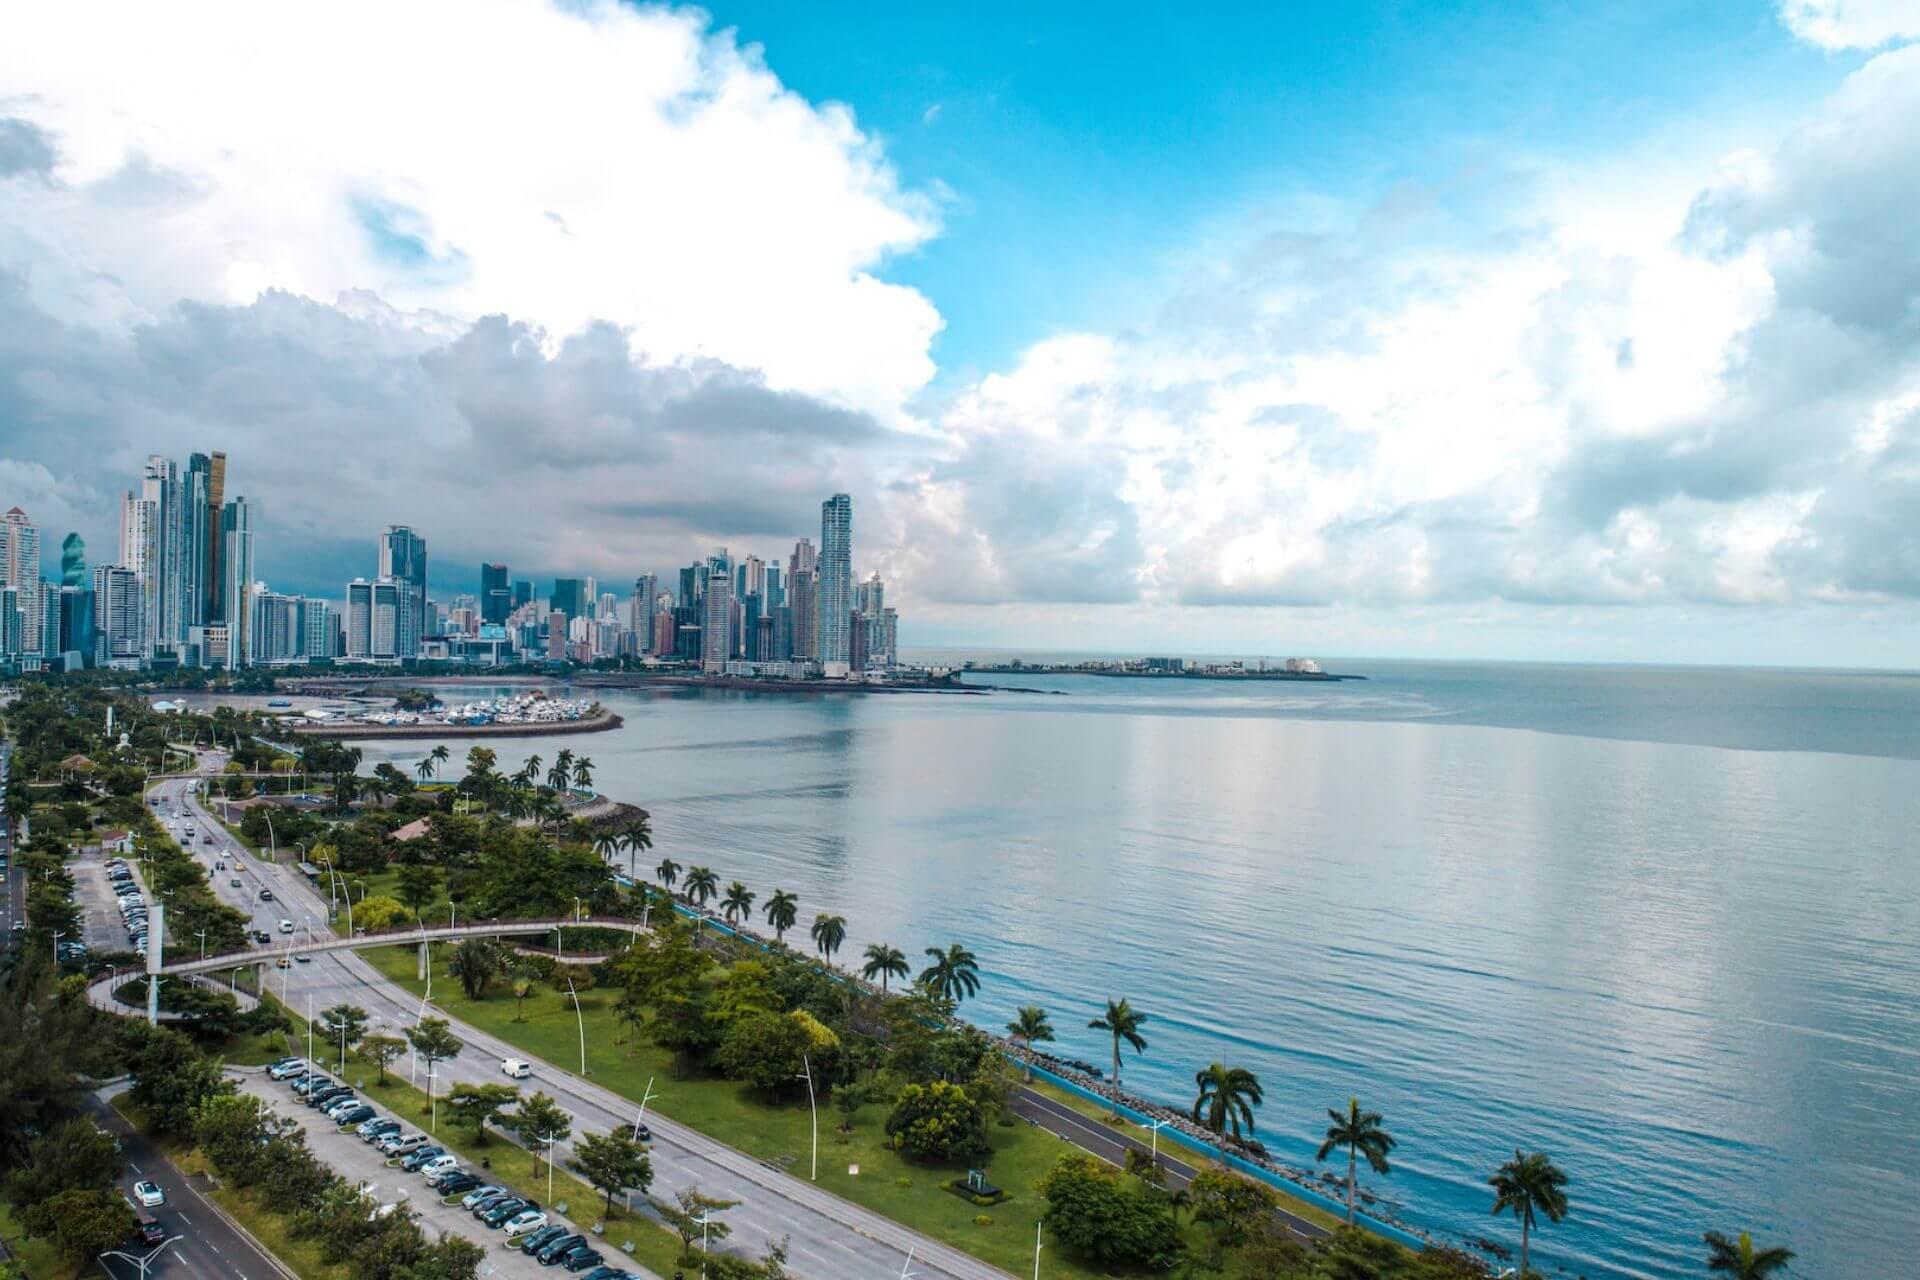 View of the Panama City surrounded by sea